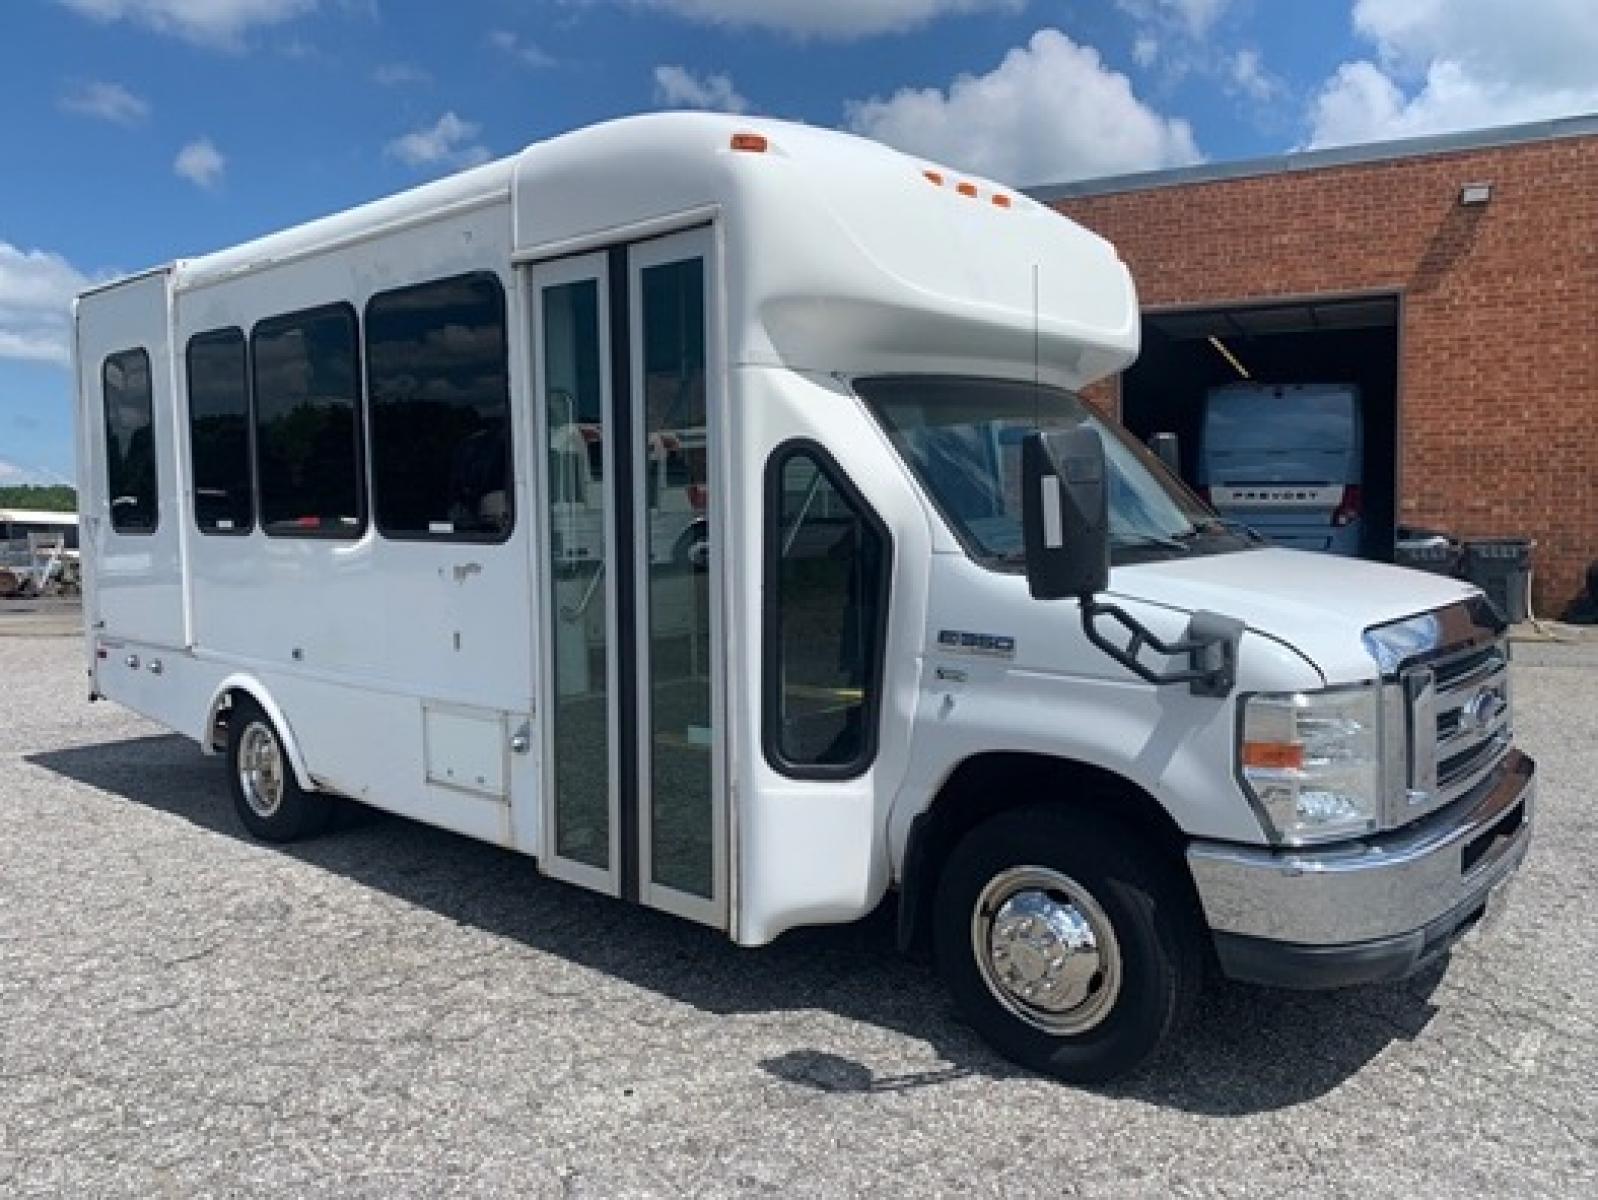 2012 White /Blue Ford E350 with an 5.4L engine, Auto transmission, 0.000000, 0.000000 - 2012 Ford E-350 Starcraft Conversion - 5.4L V8 Gas Engine - Automatic Trans - Electric Entrance Door - 8 Passengers + 2 Wheelchairs - Mid Back Seats - Retractable Seat Belts - Stainless Wheel Simulators - Front and Rear A/C - Handicap Lift - 6 New Tire s - Photo #0